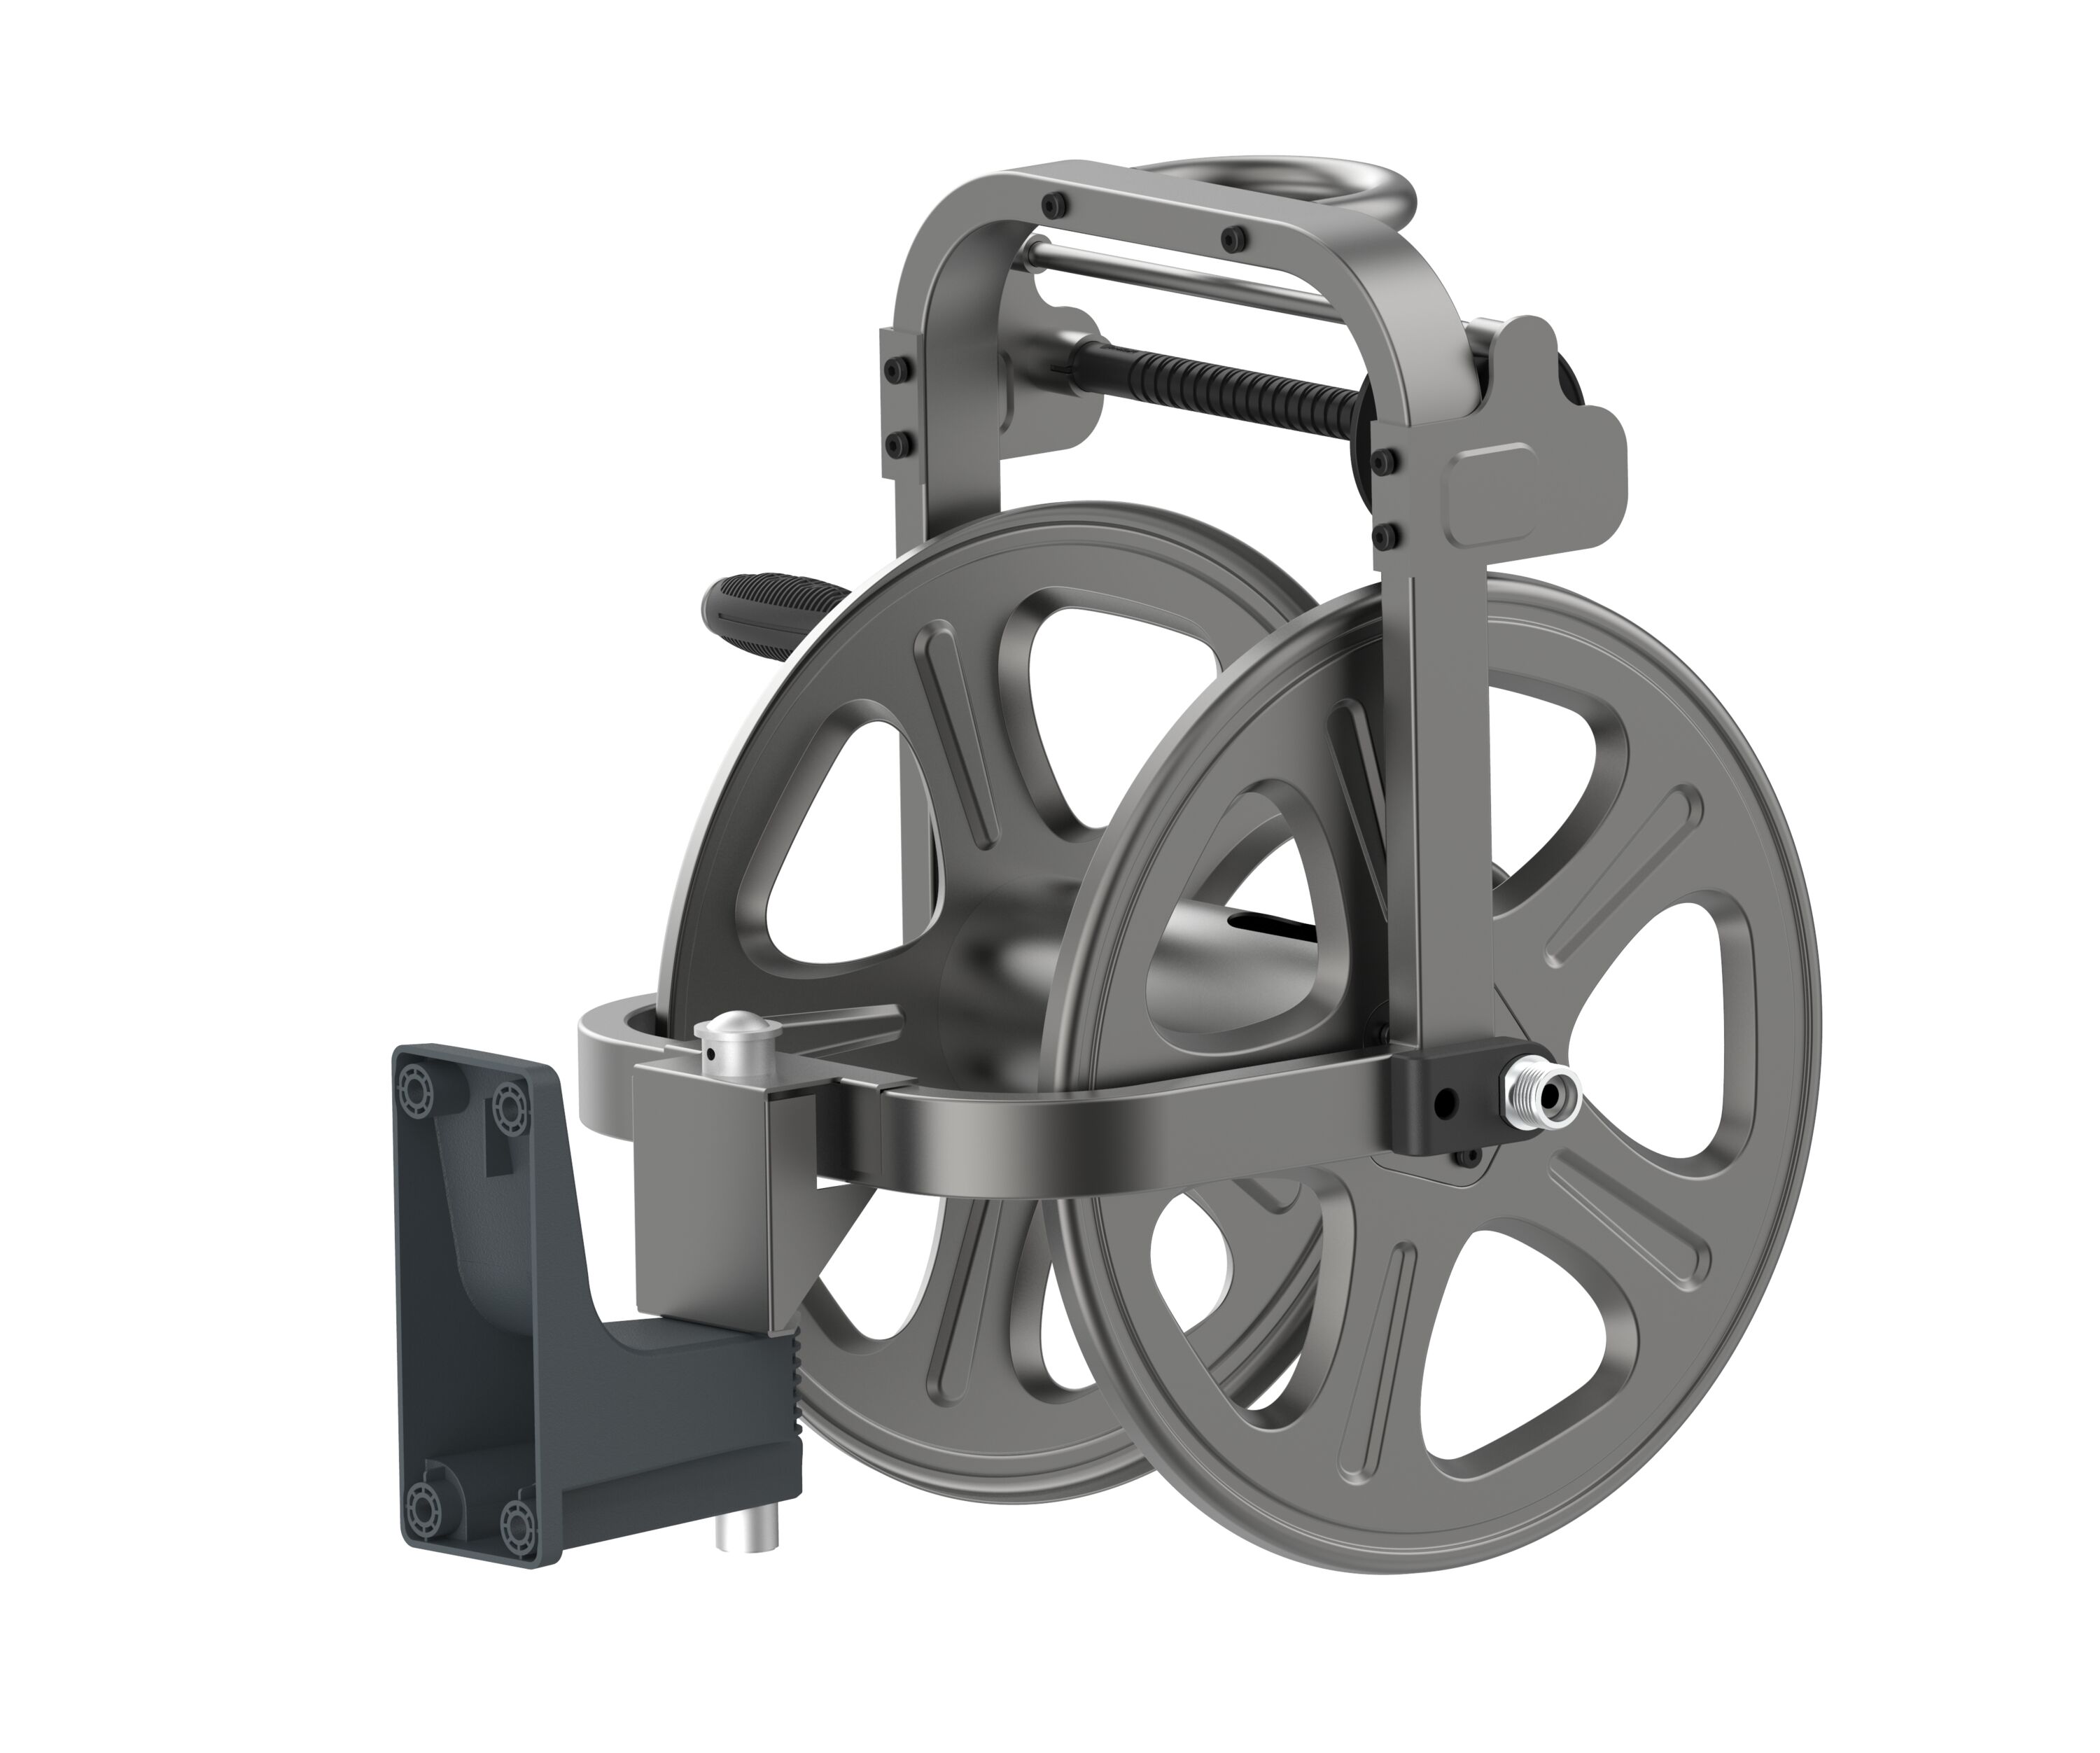 Sunneday The wall mounted hose reel will hold up to 125 ft. of